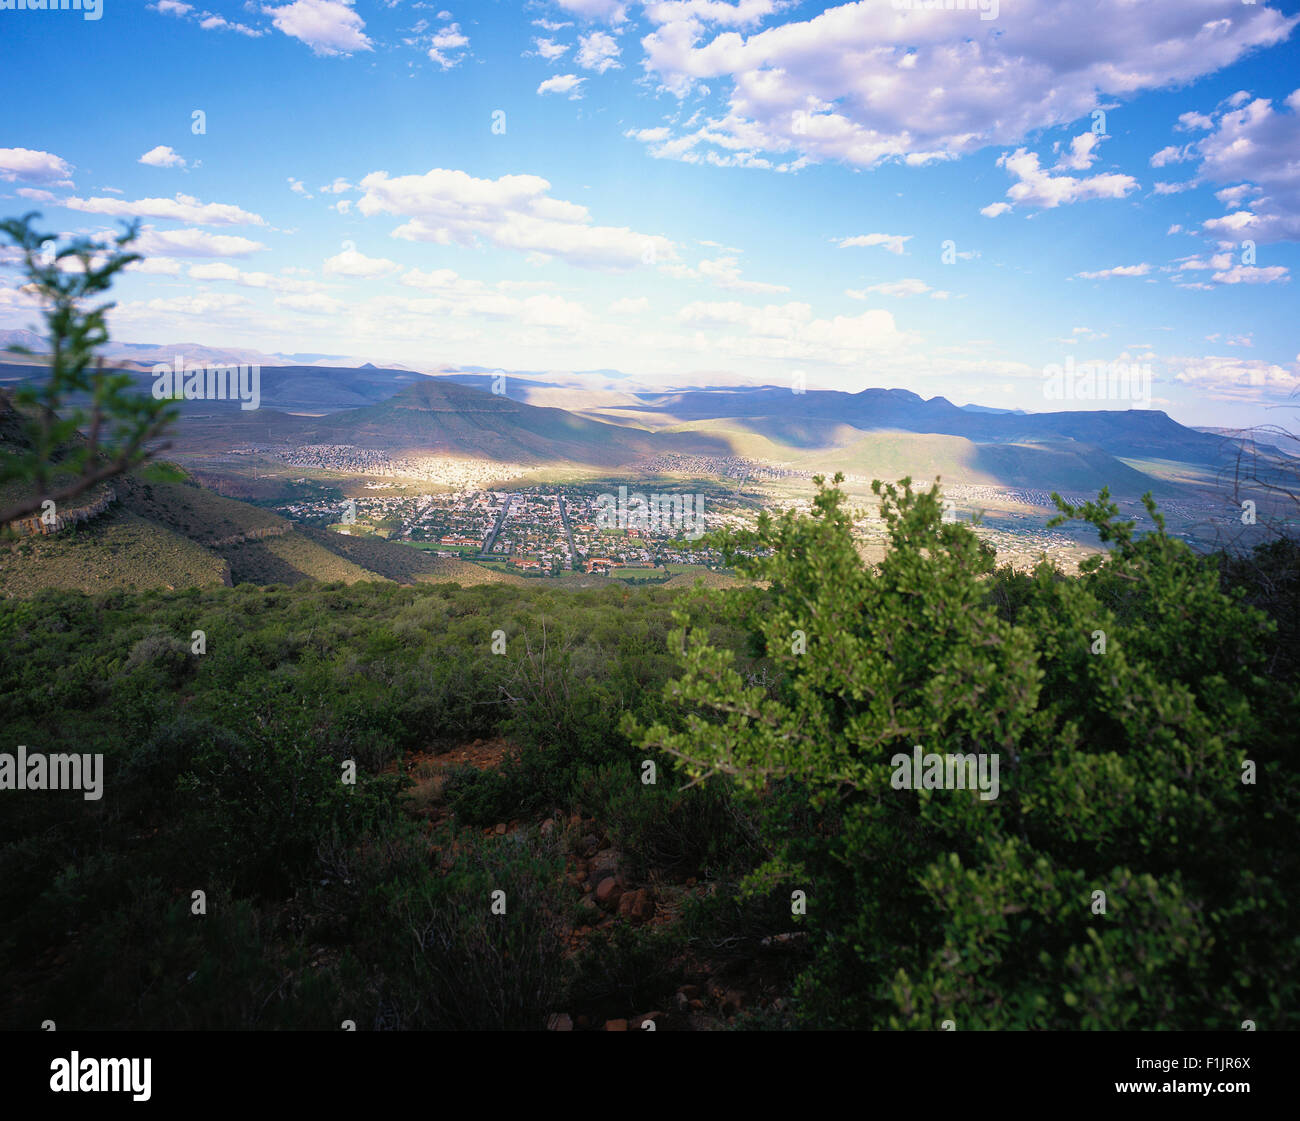 Graaf Reinet Eastern Cape, South Africa Stock Photo